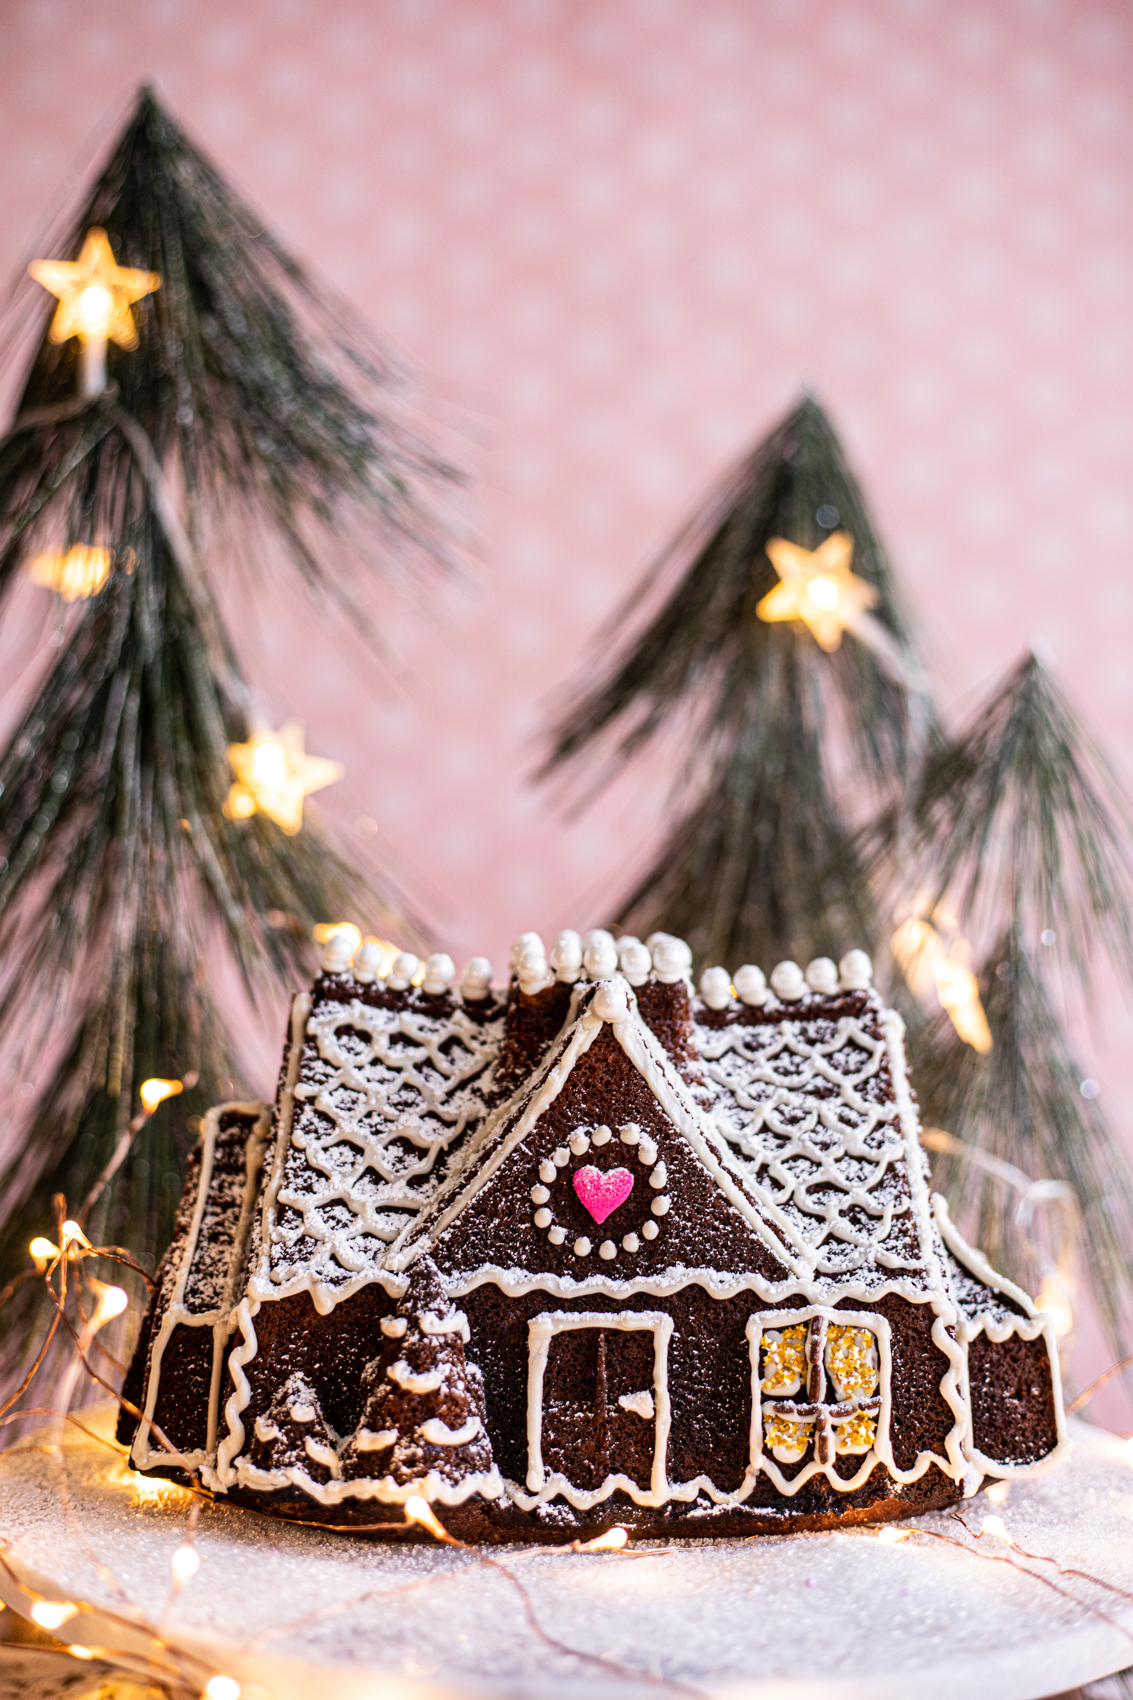 The Gingerbread Home.